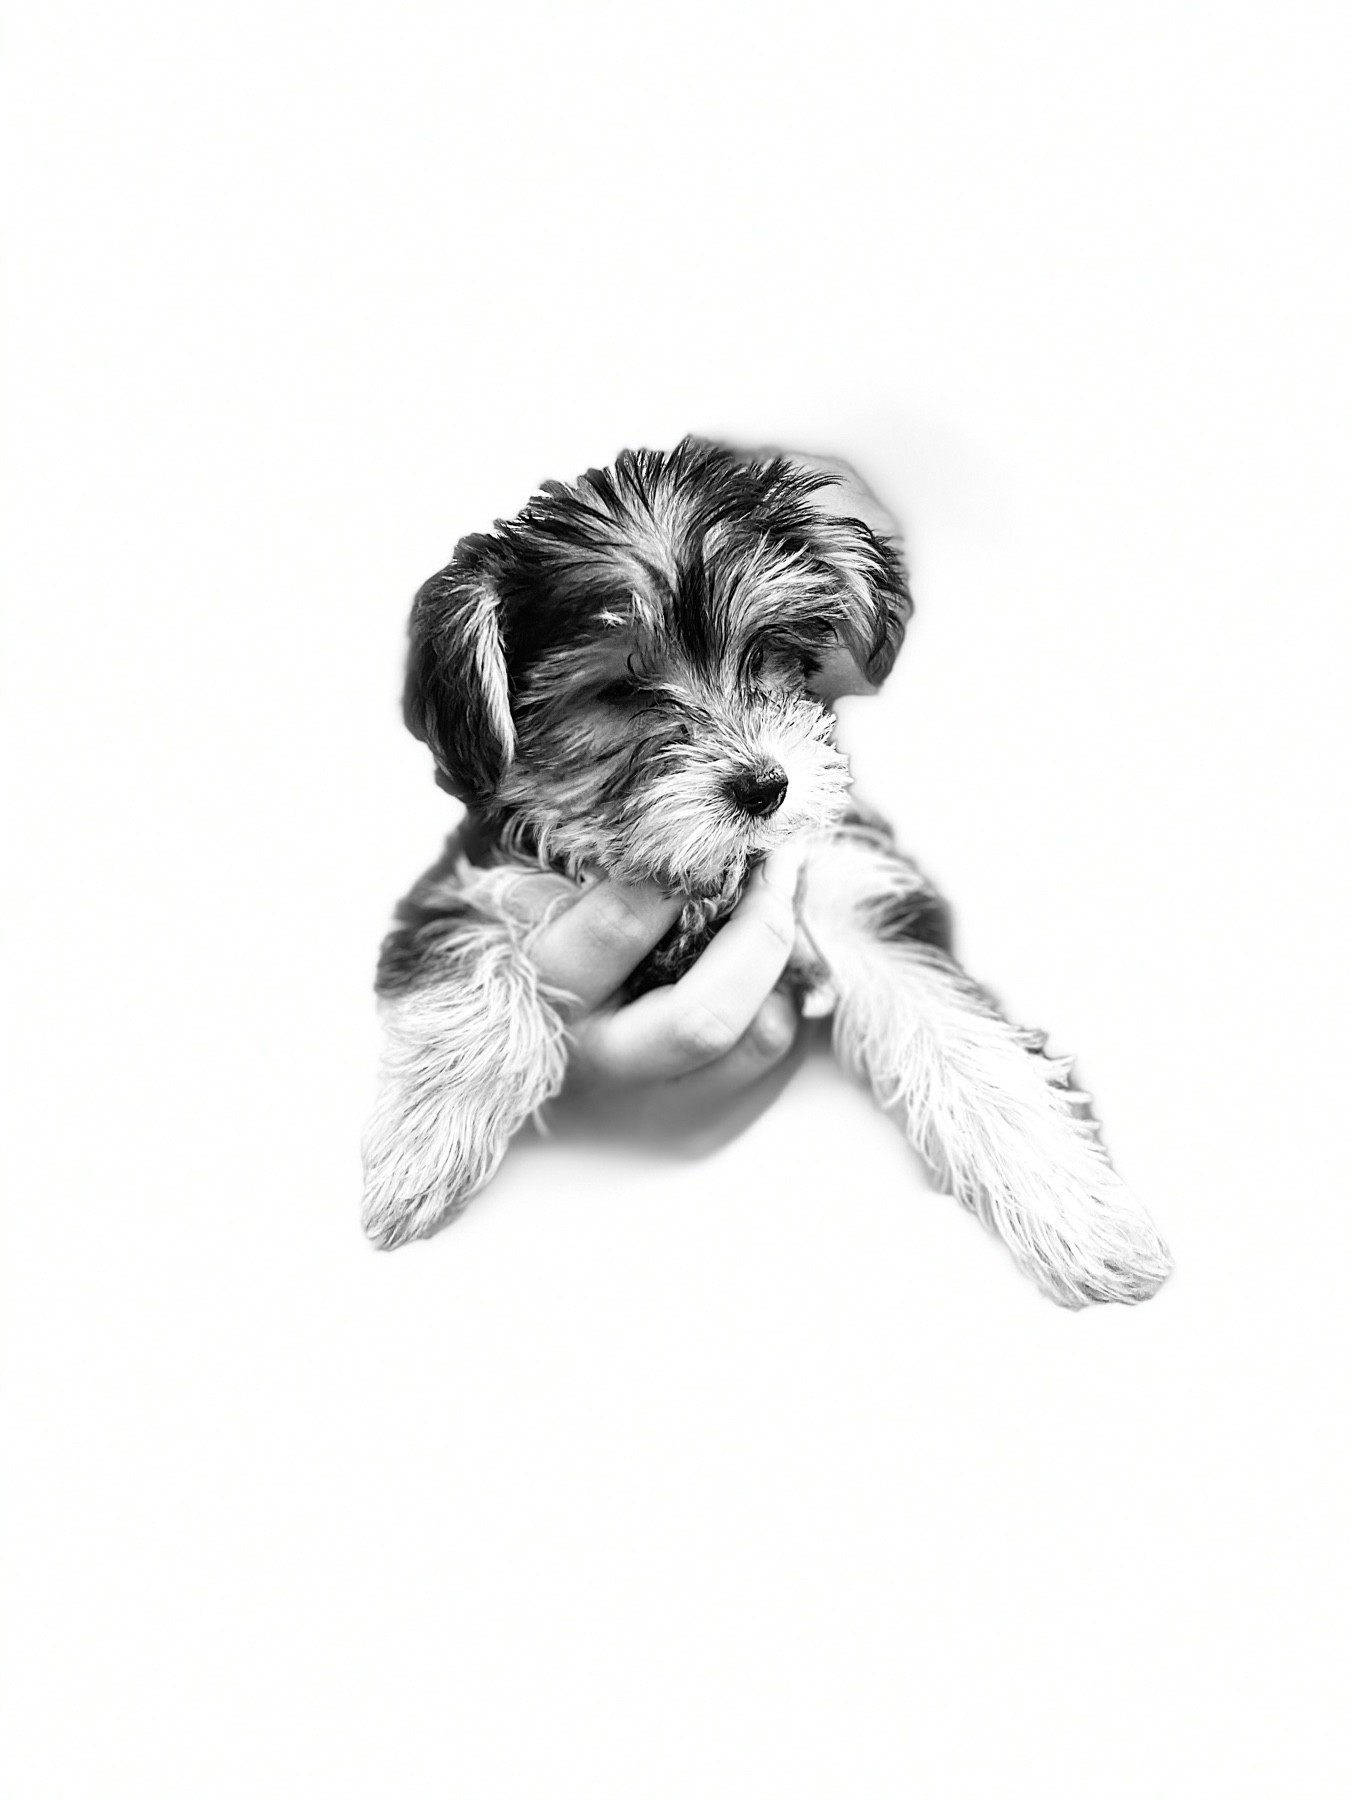 a high-contrast, black and white photo of a puppy being held out in one hand by its owner